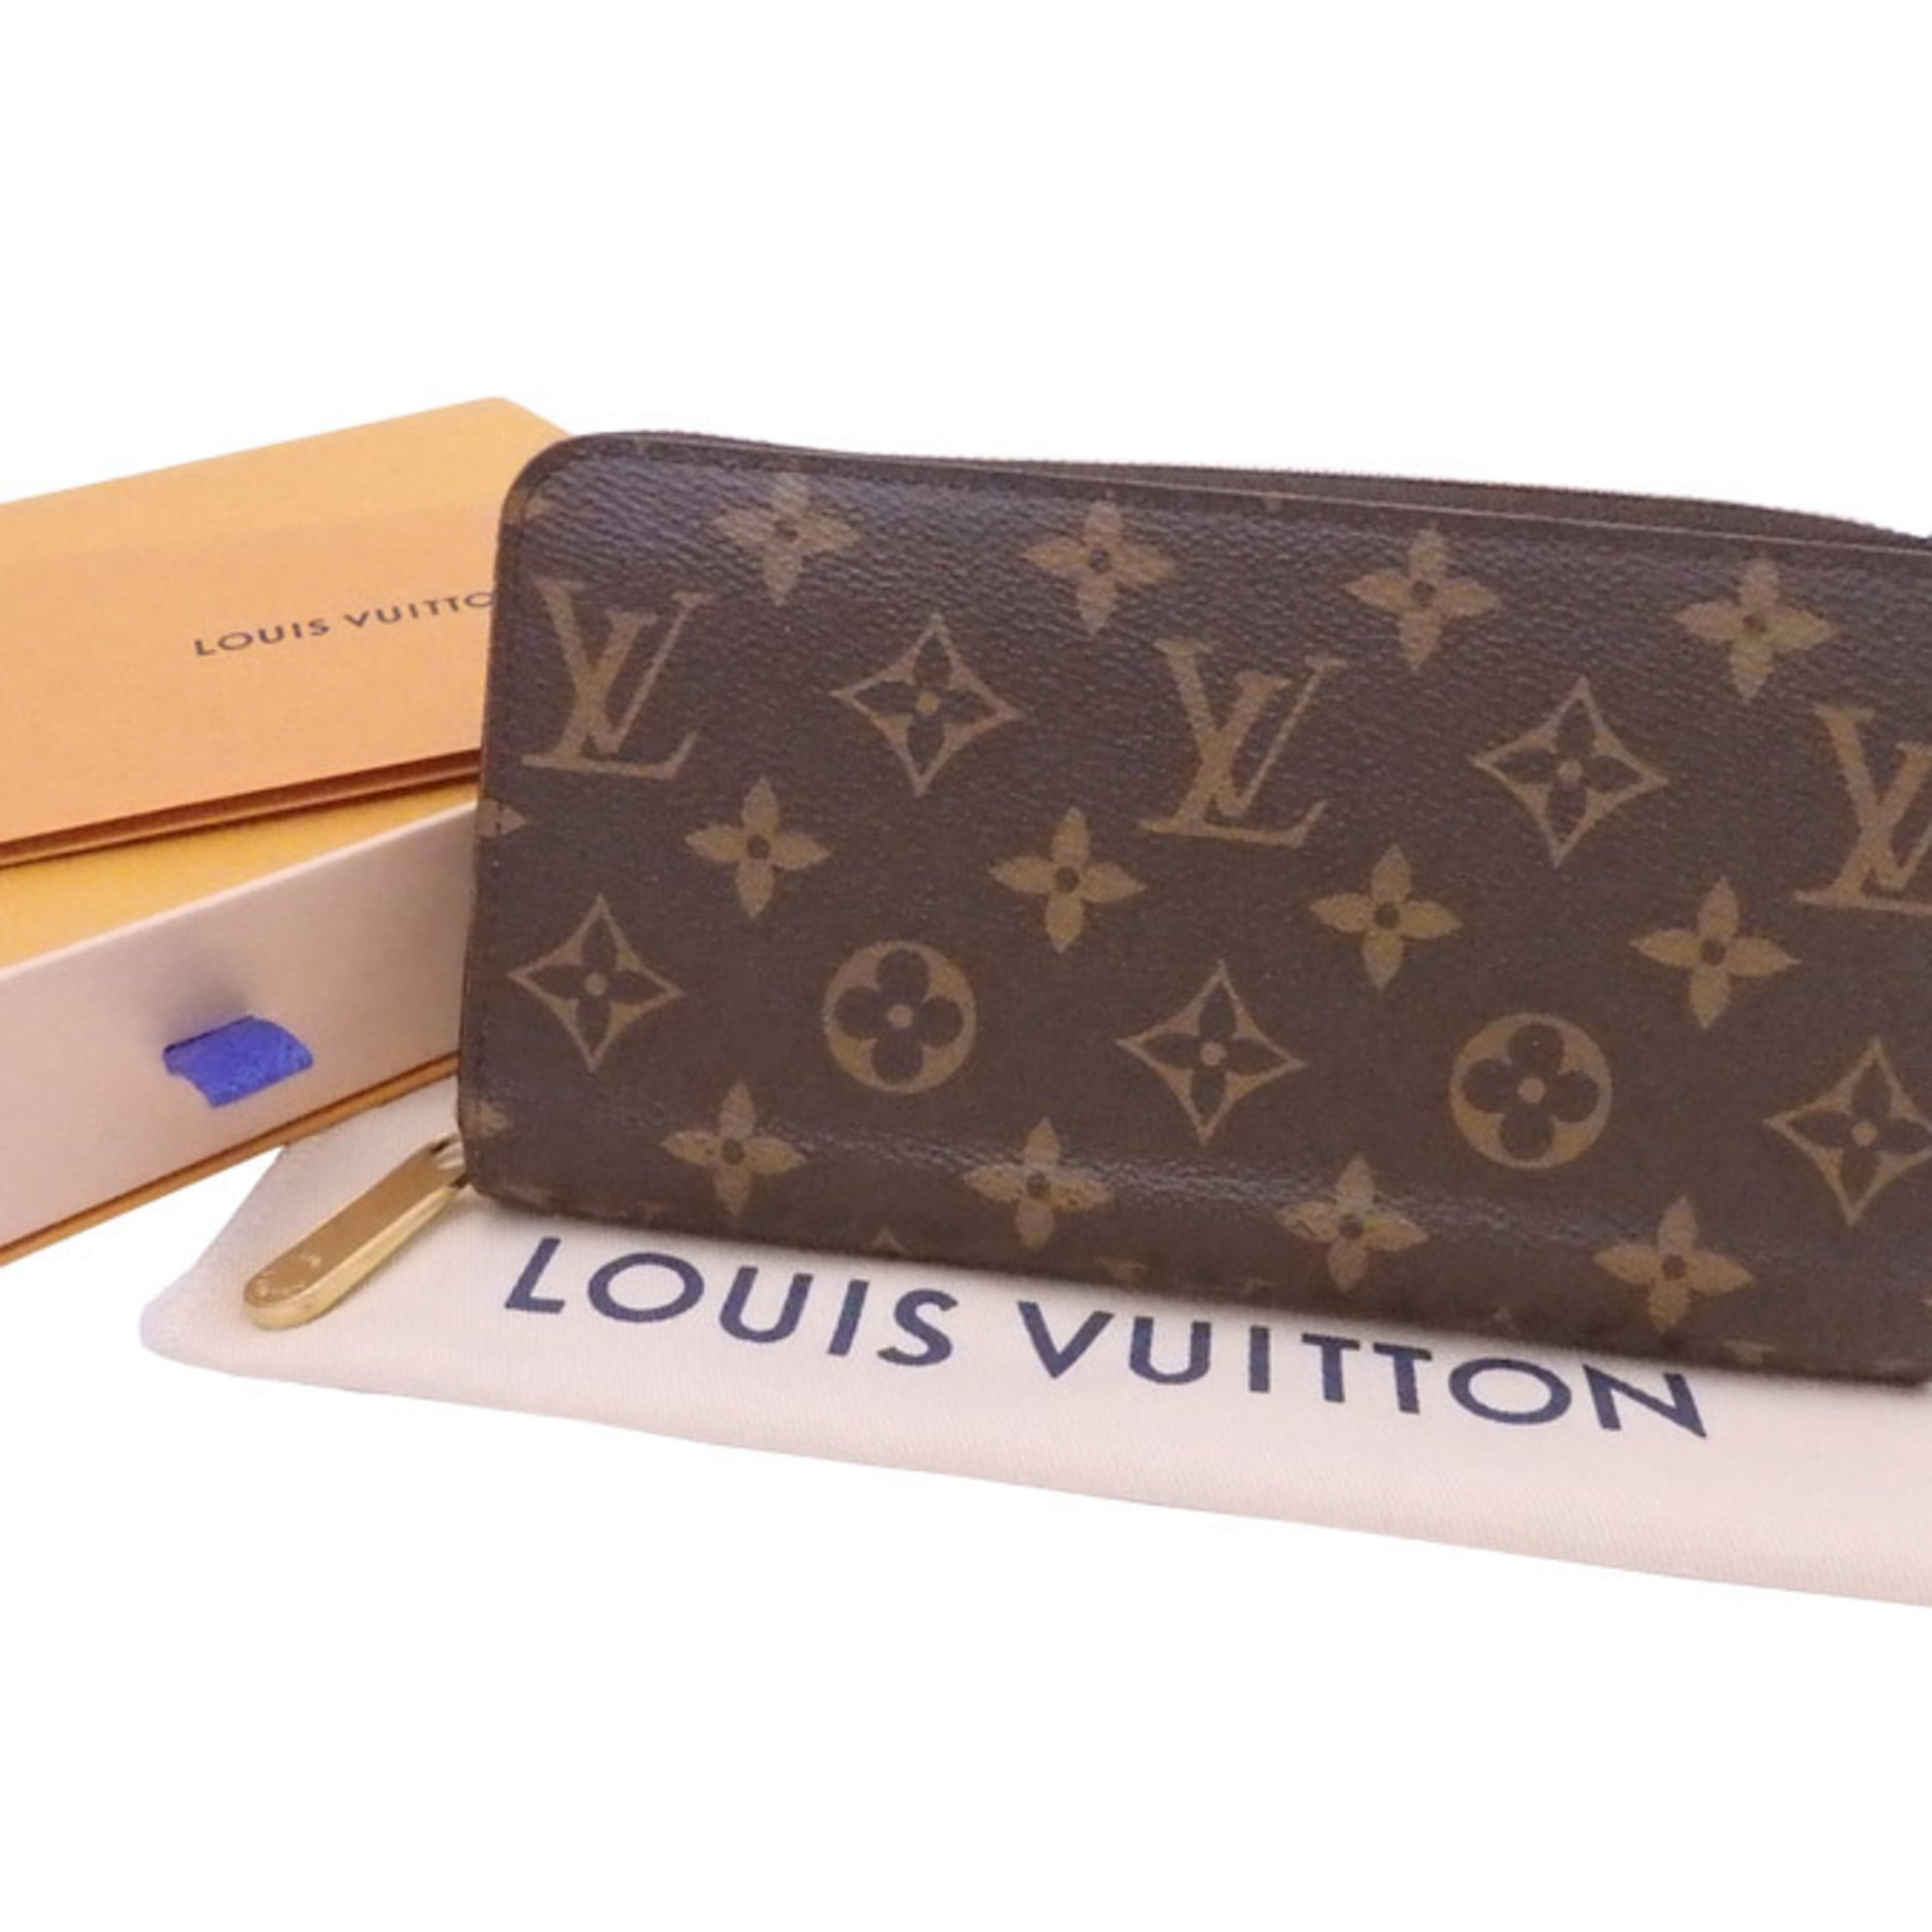 Louis Vuitton - Authenticated Zippy Wallet - Cloth Brown for Women, Very Good Condition